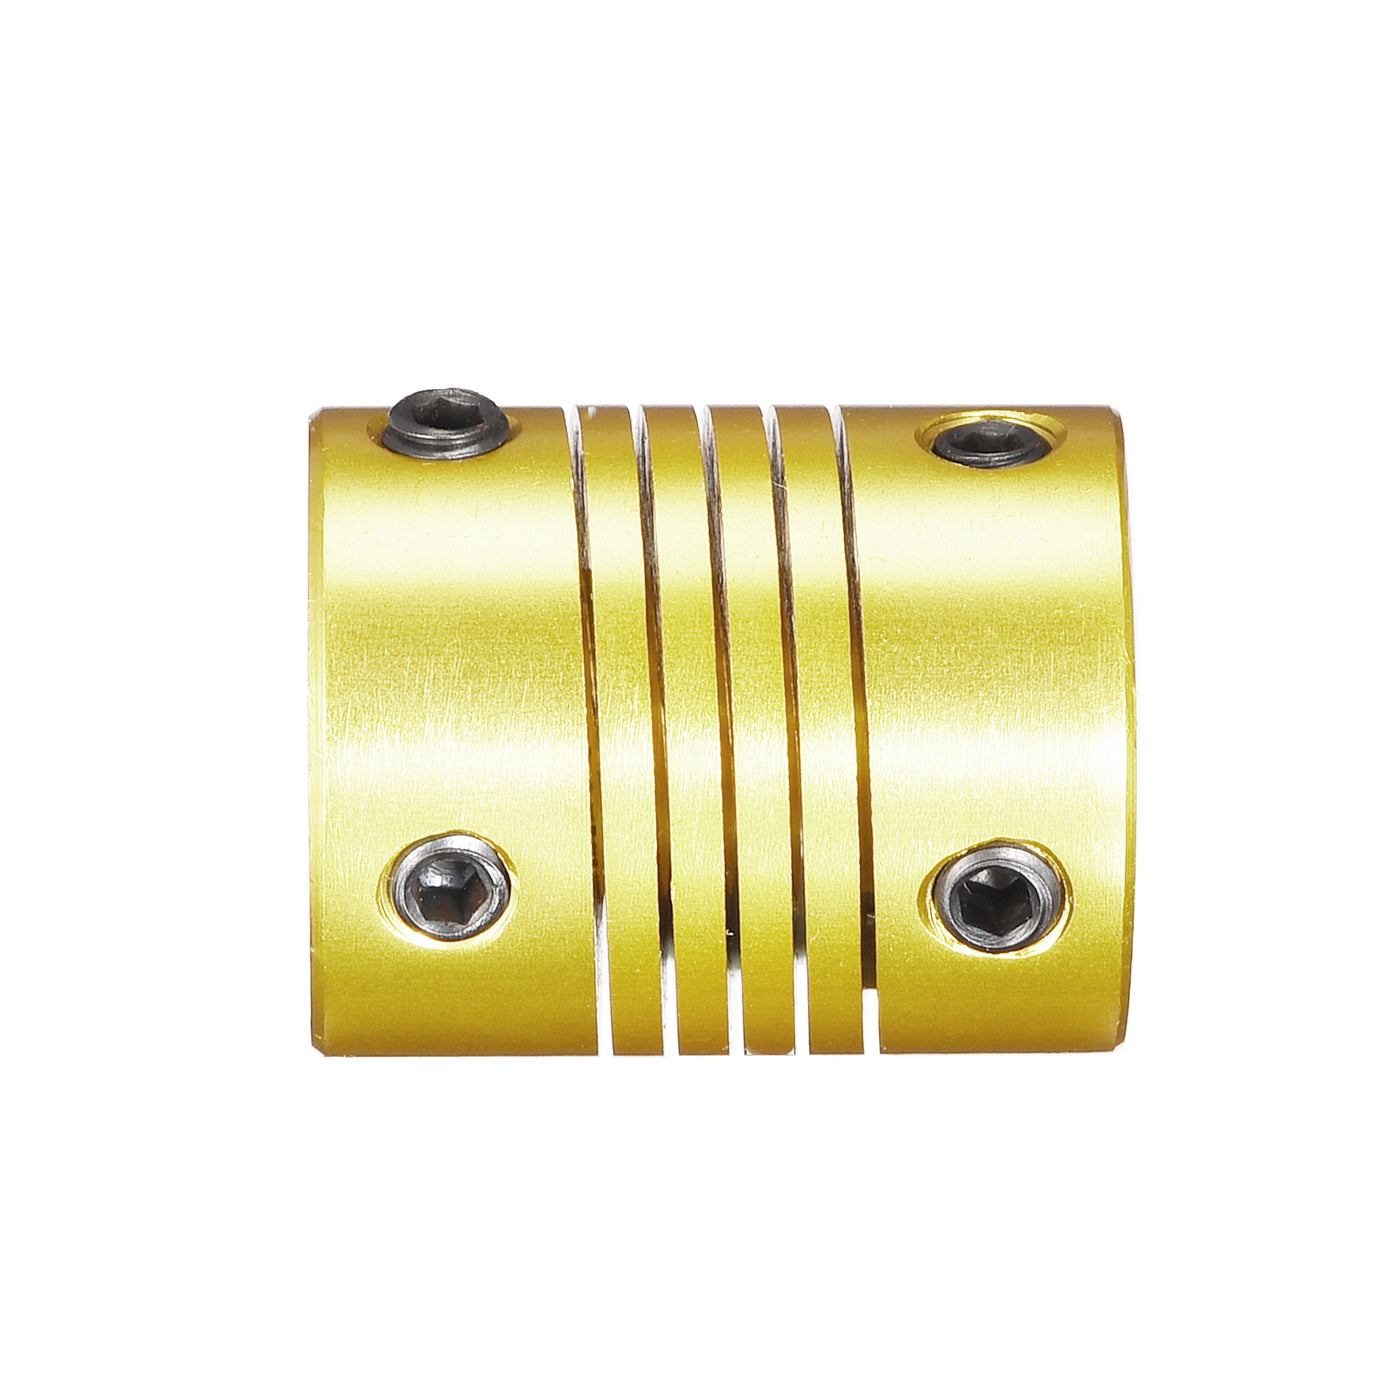 uxcell Uxcell 5 Pcs 8mm to 5mm Aluminum Alloy Shaft Coupling Flexible L25xD20 Golden Tone